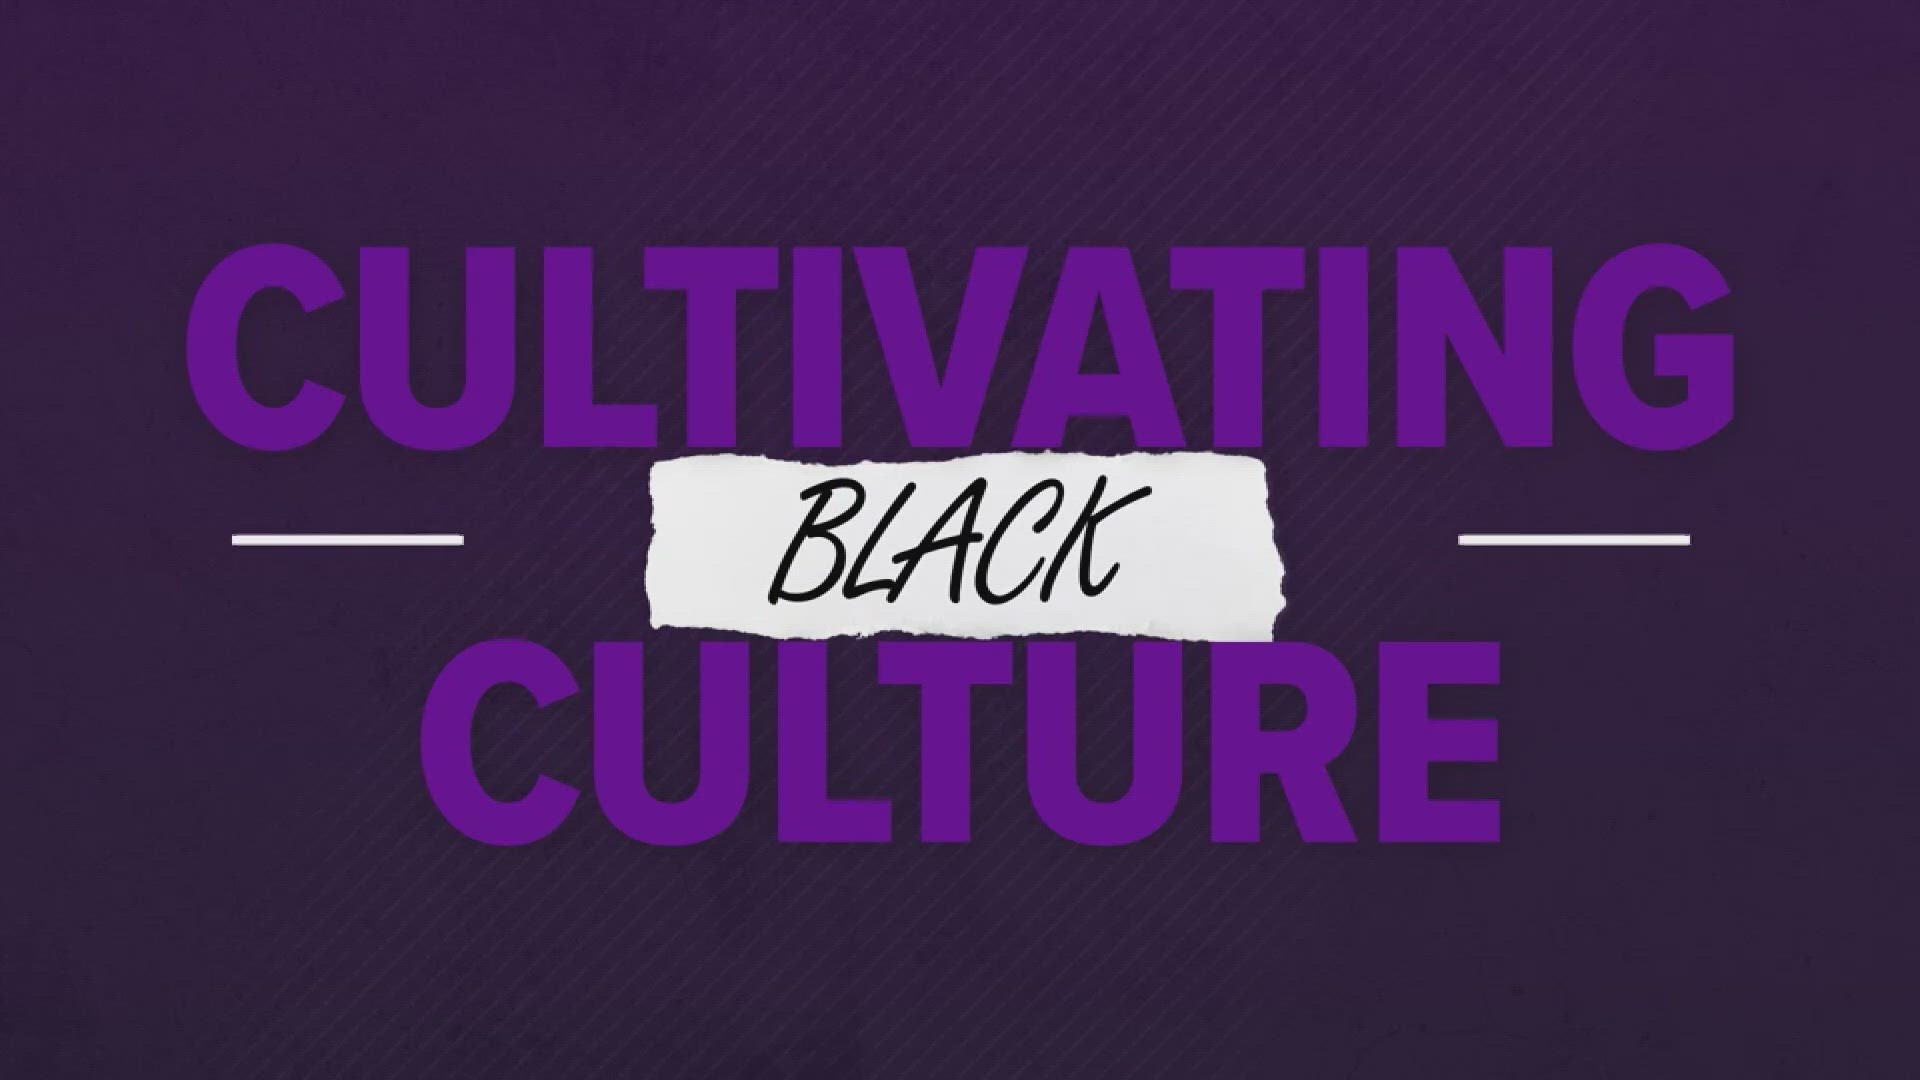 Our new Cultivating Culture series will highlight Black innovators that are creating more spaces for community in western Washington.